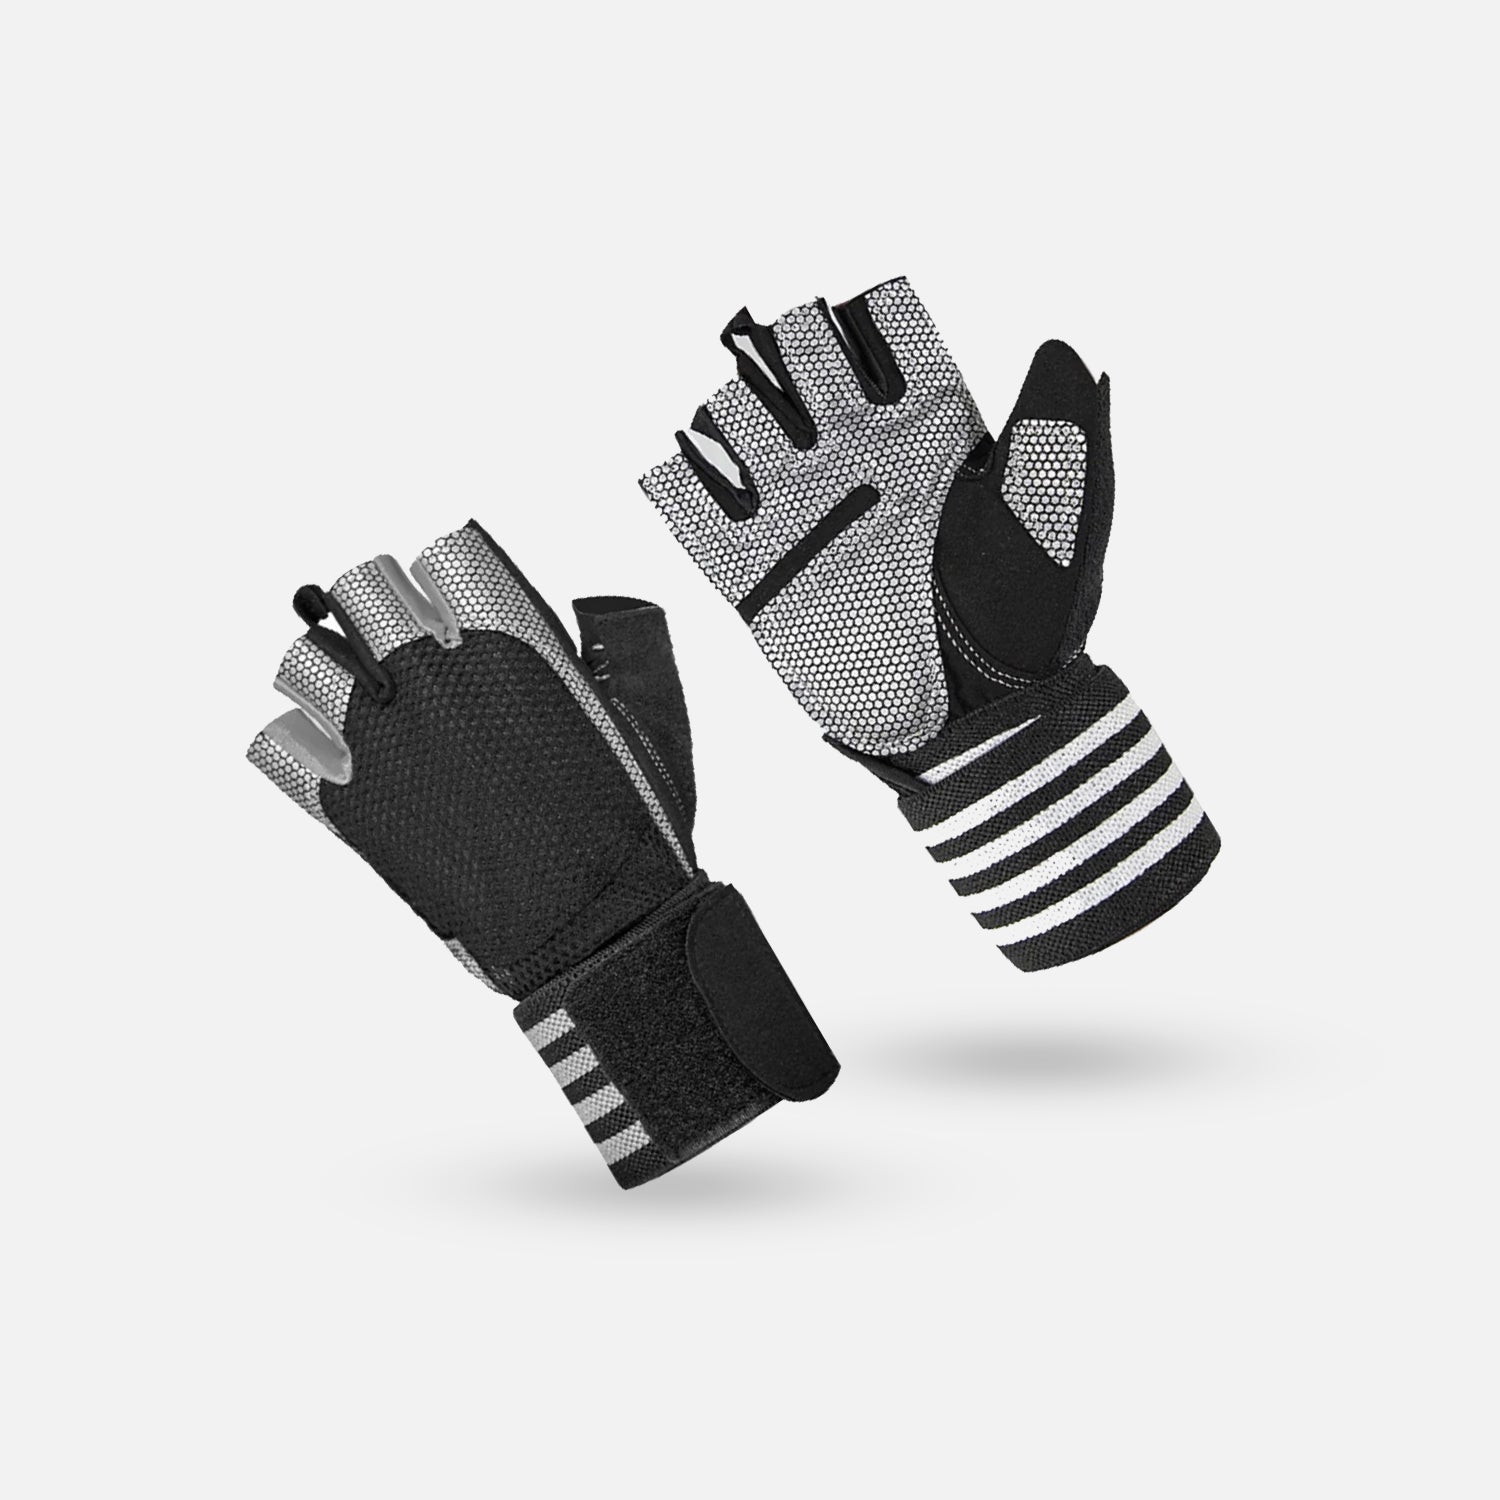 Buy Gym Hand Grip Gloves & Fitness Gloves with Wrist Support – Hykes